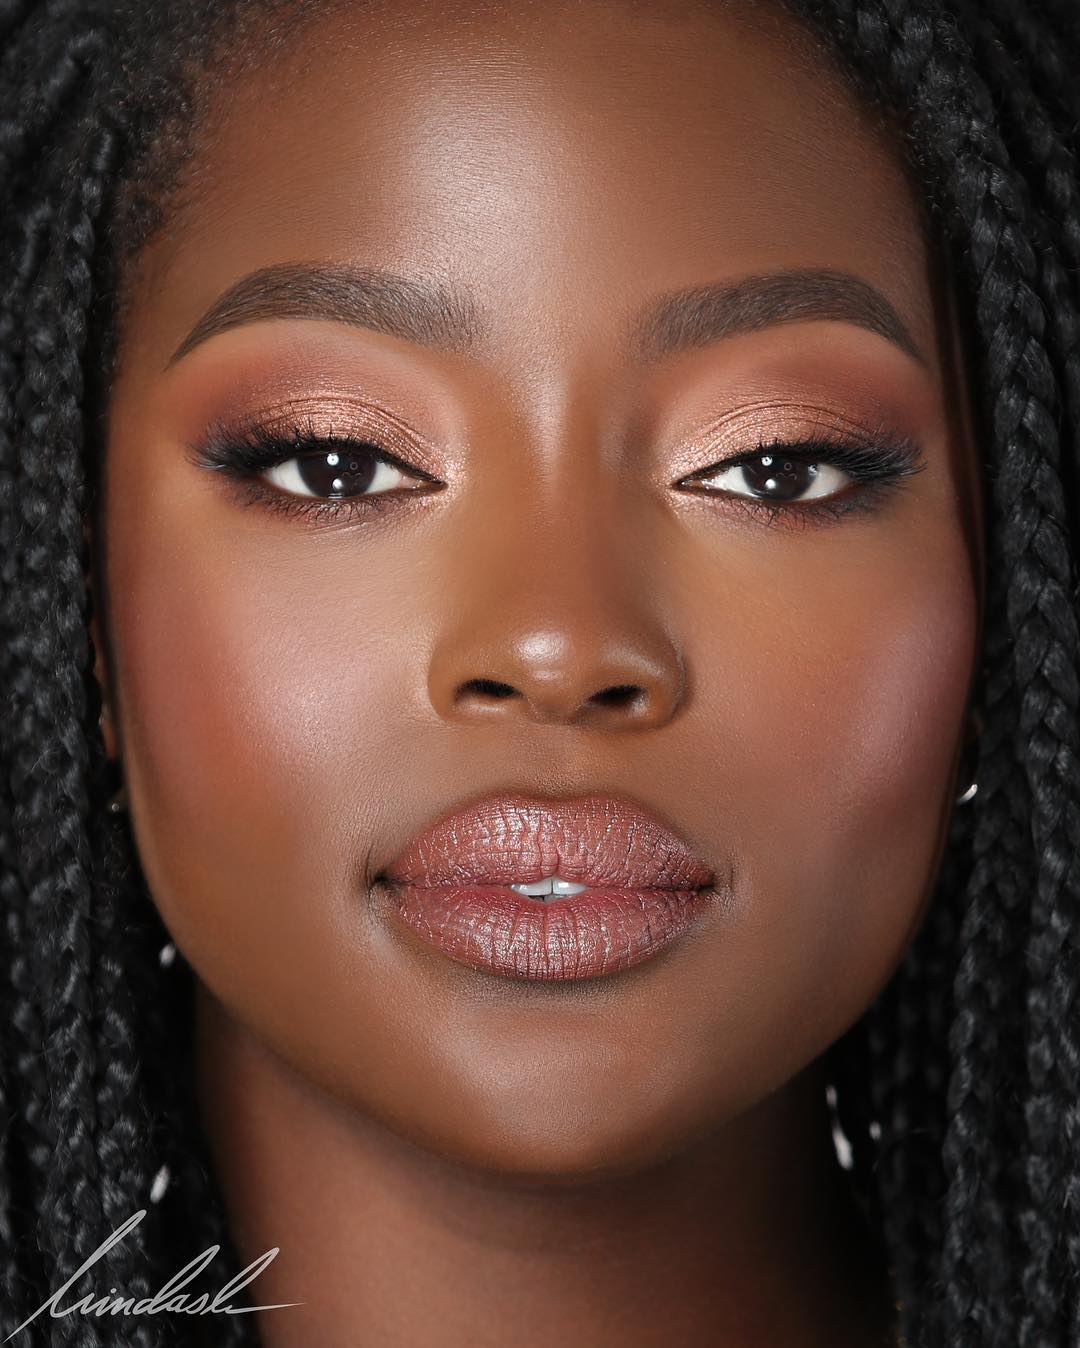 10 Refreshing Beauty Instagrams We Absolutely Love